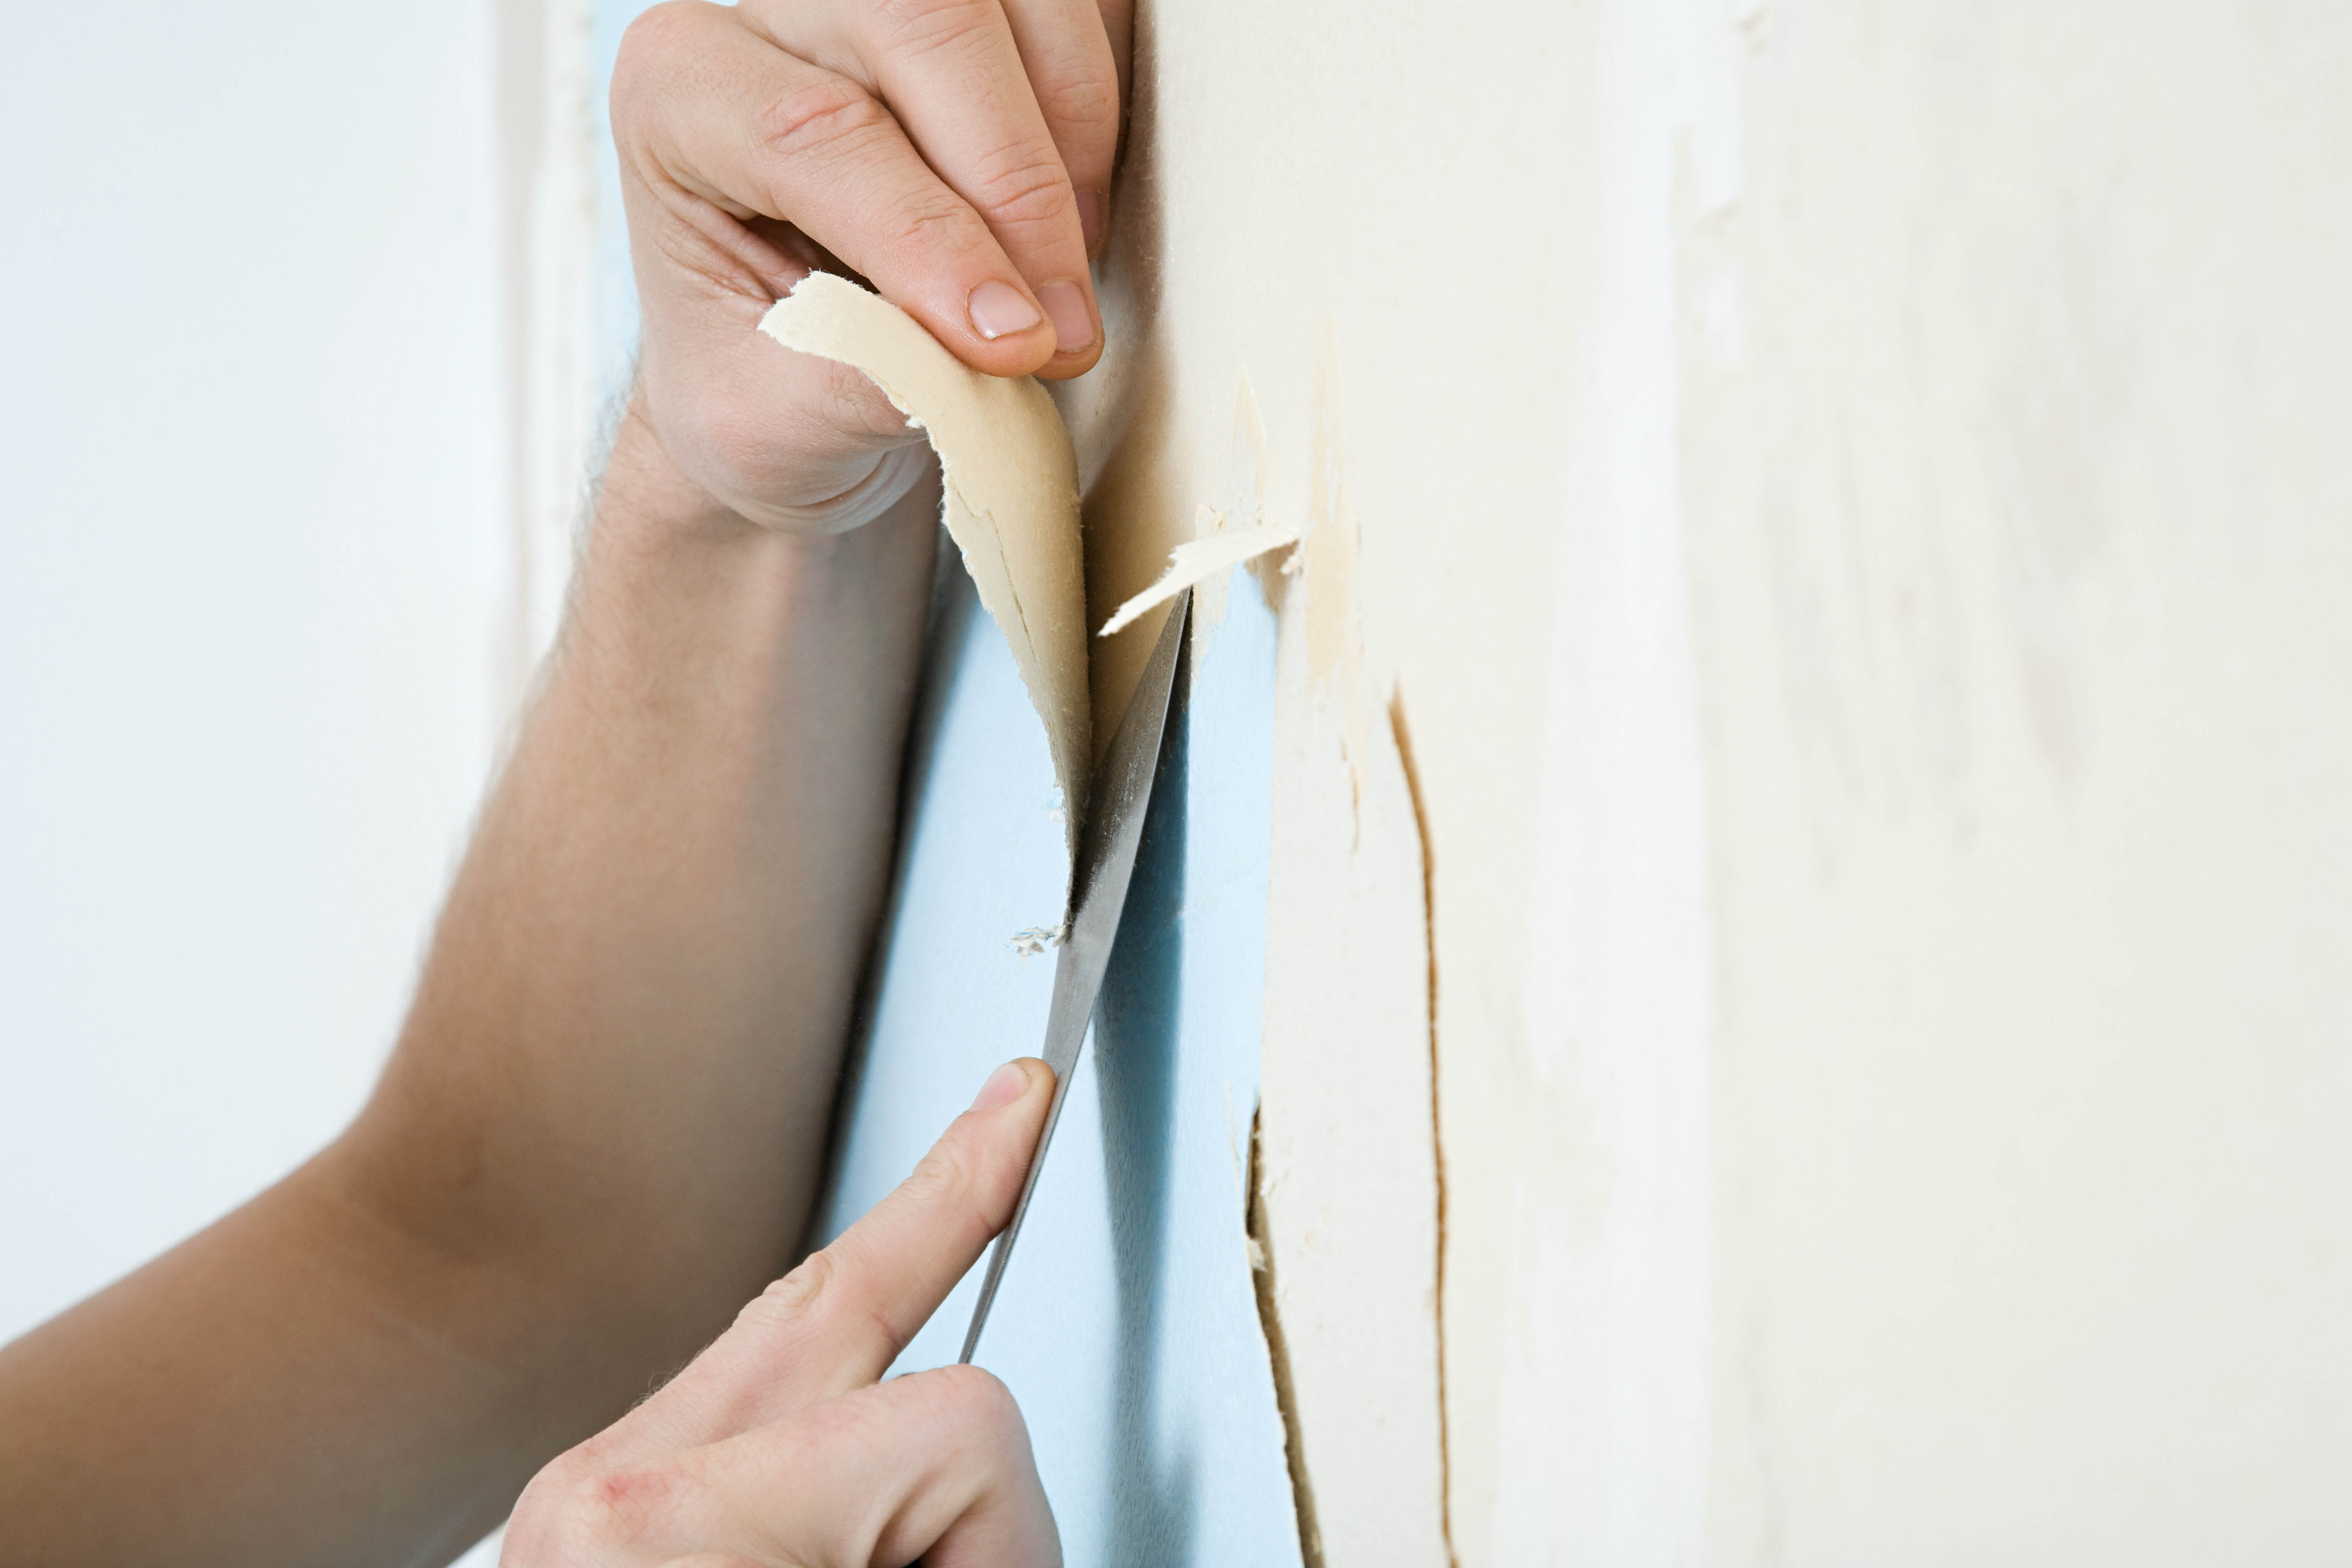 How To Get Wallpaper Glue Off Drywall